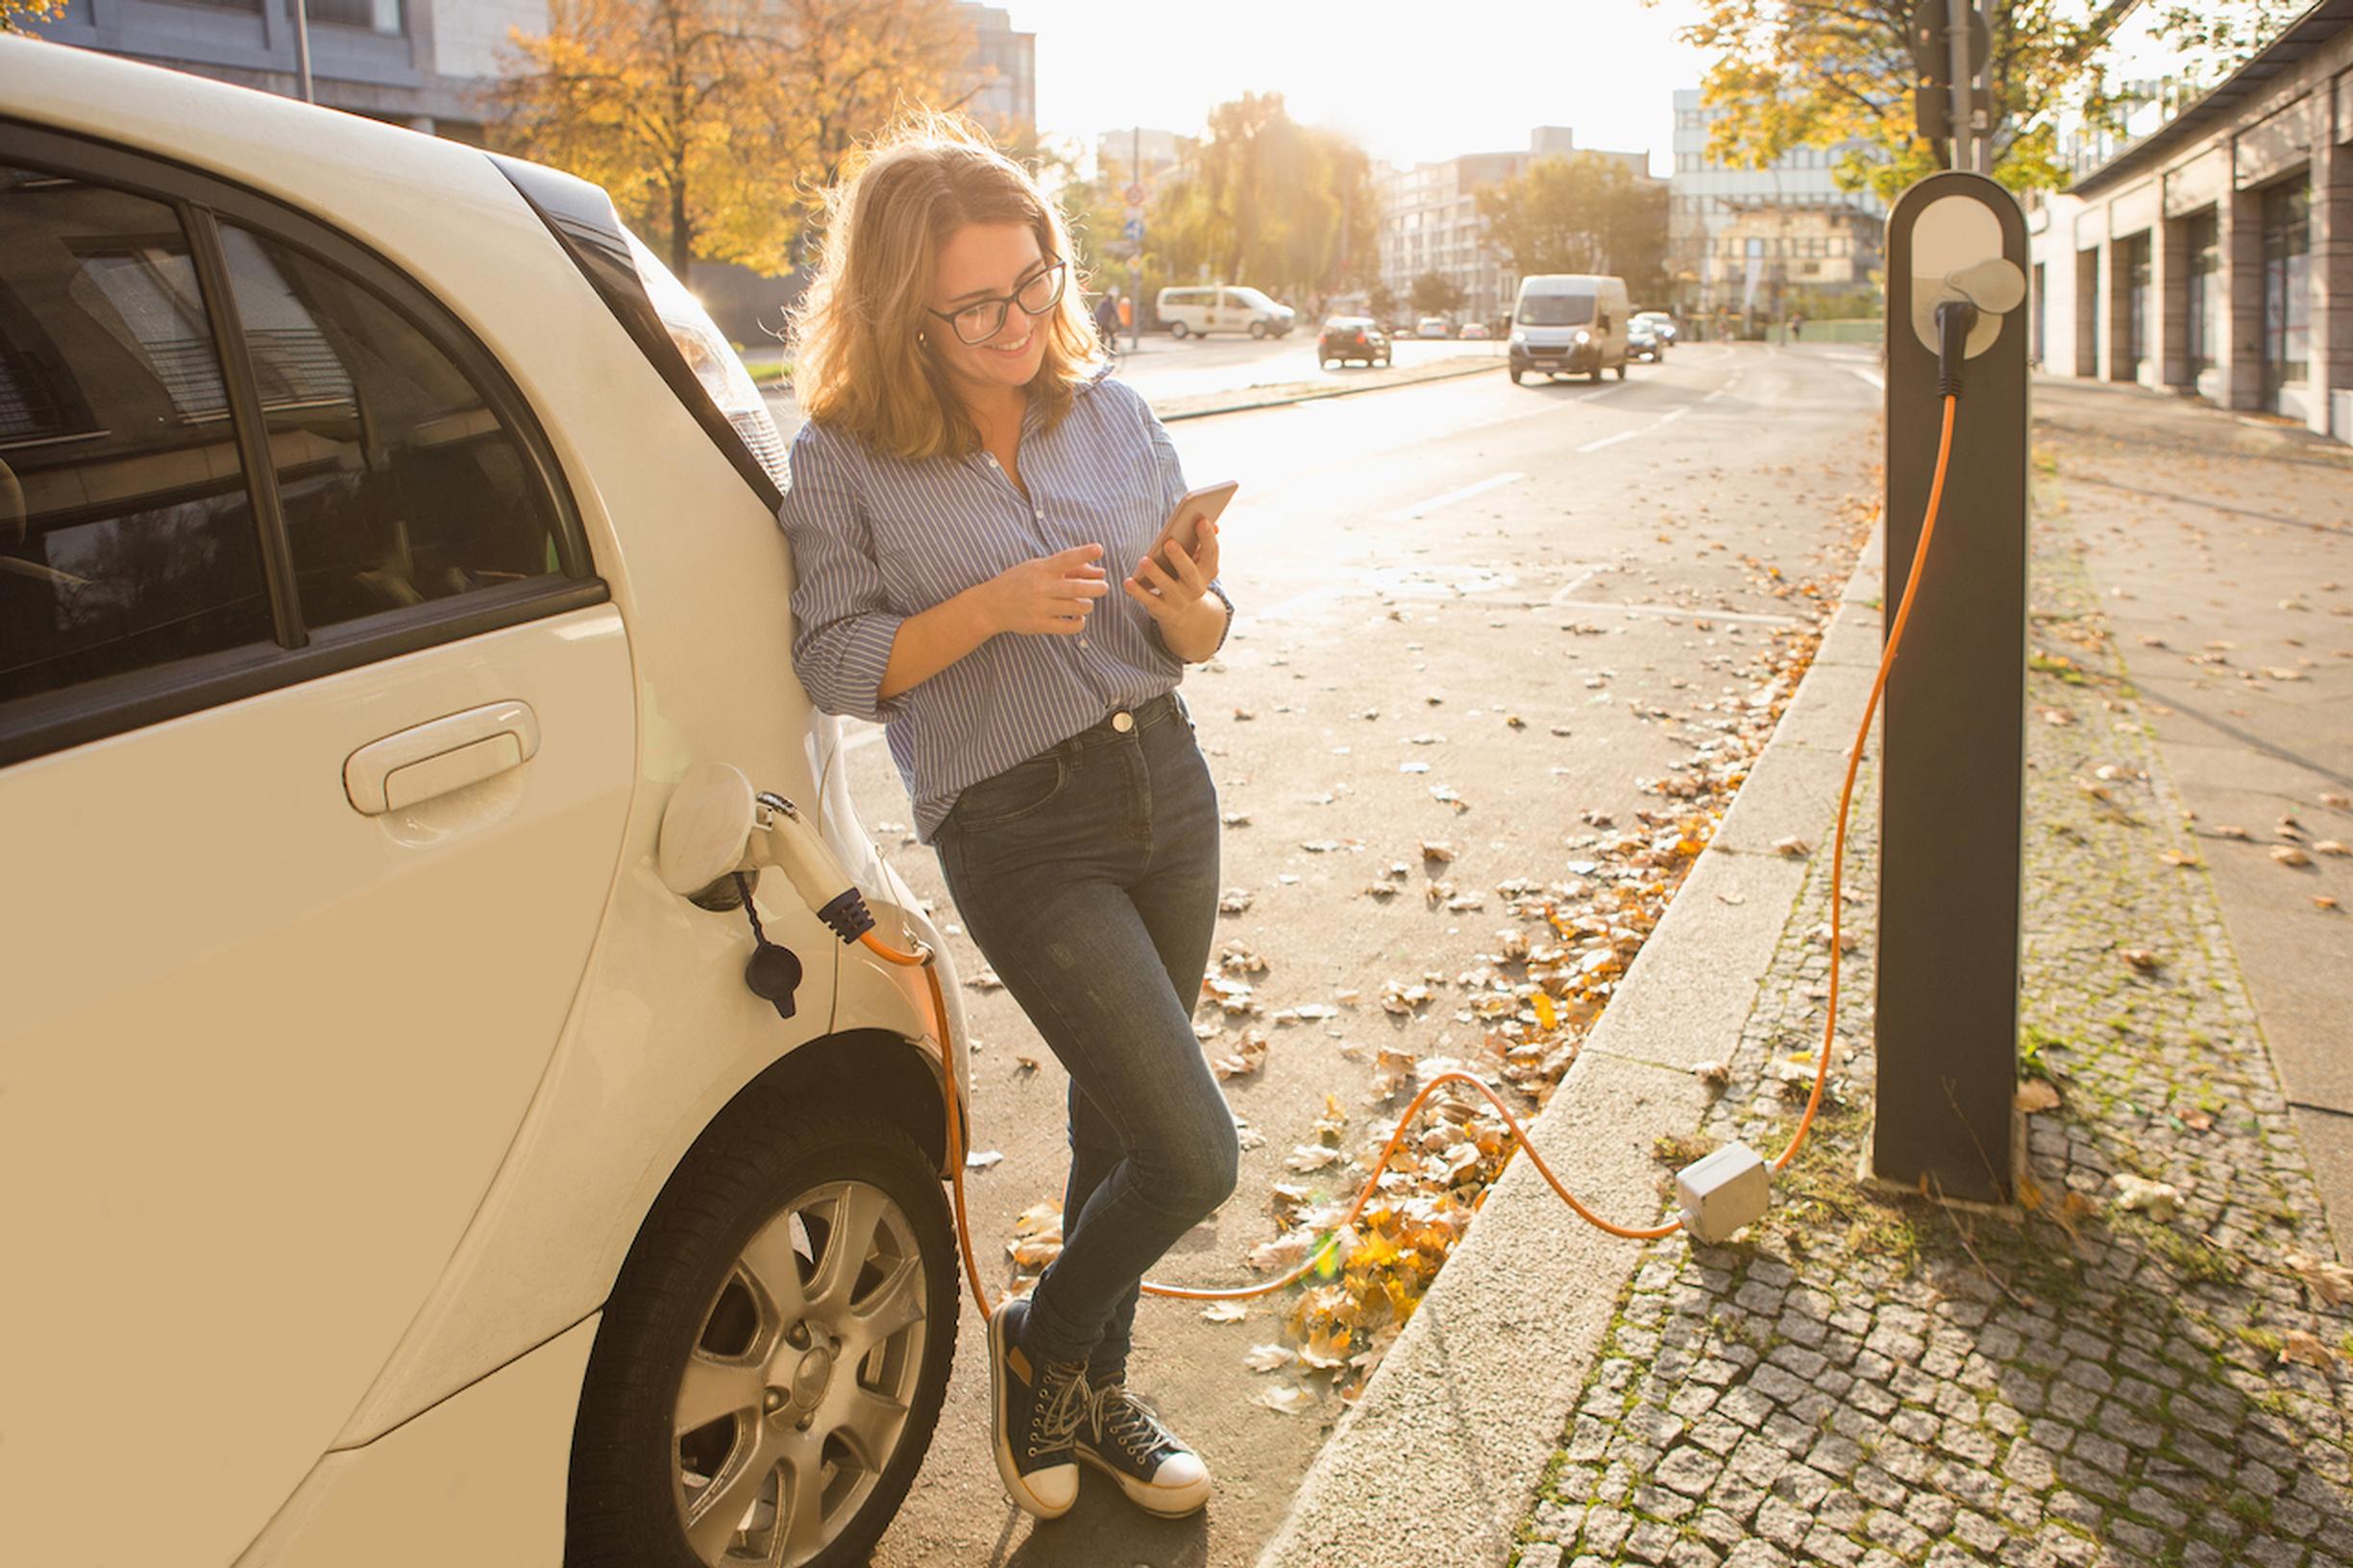 There are many unknowns about the transition to zero emission vehicles, including the response of car buyers and how travel patterns evolve post-Covid